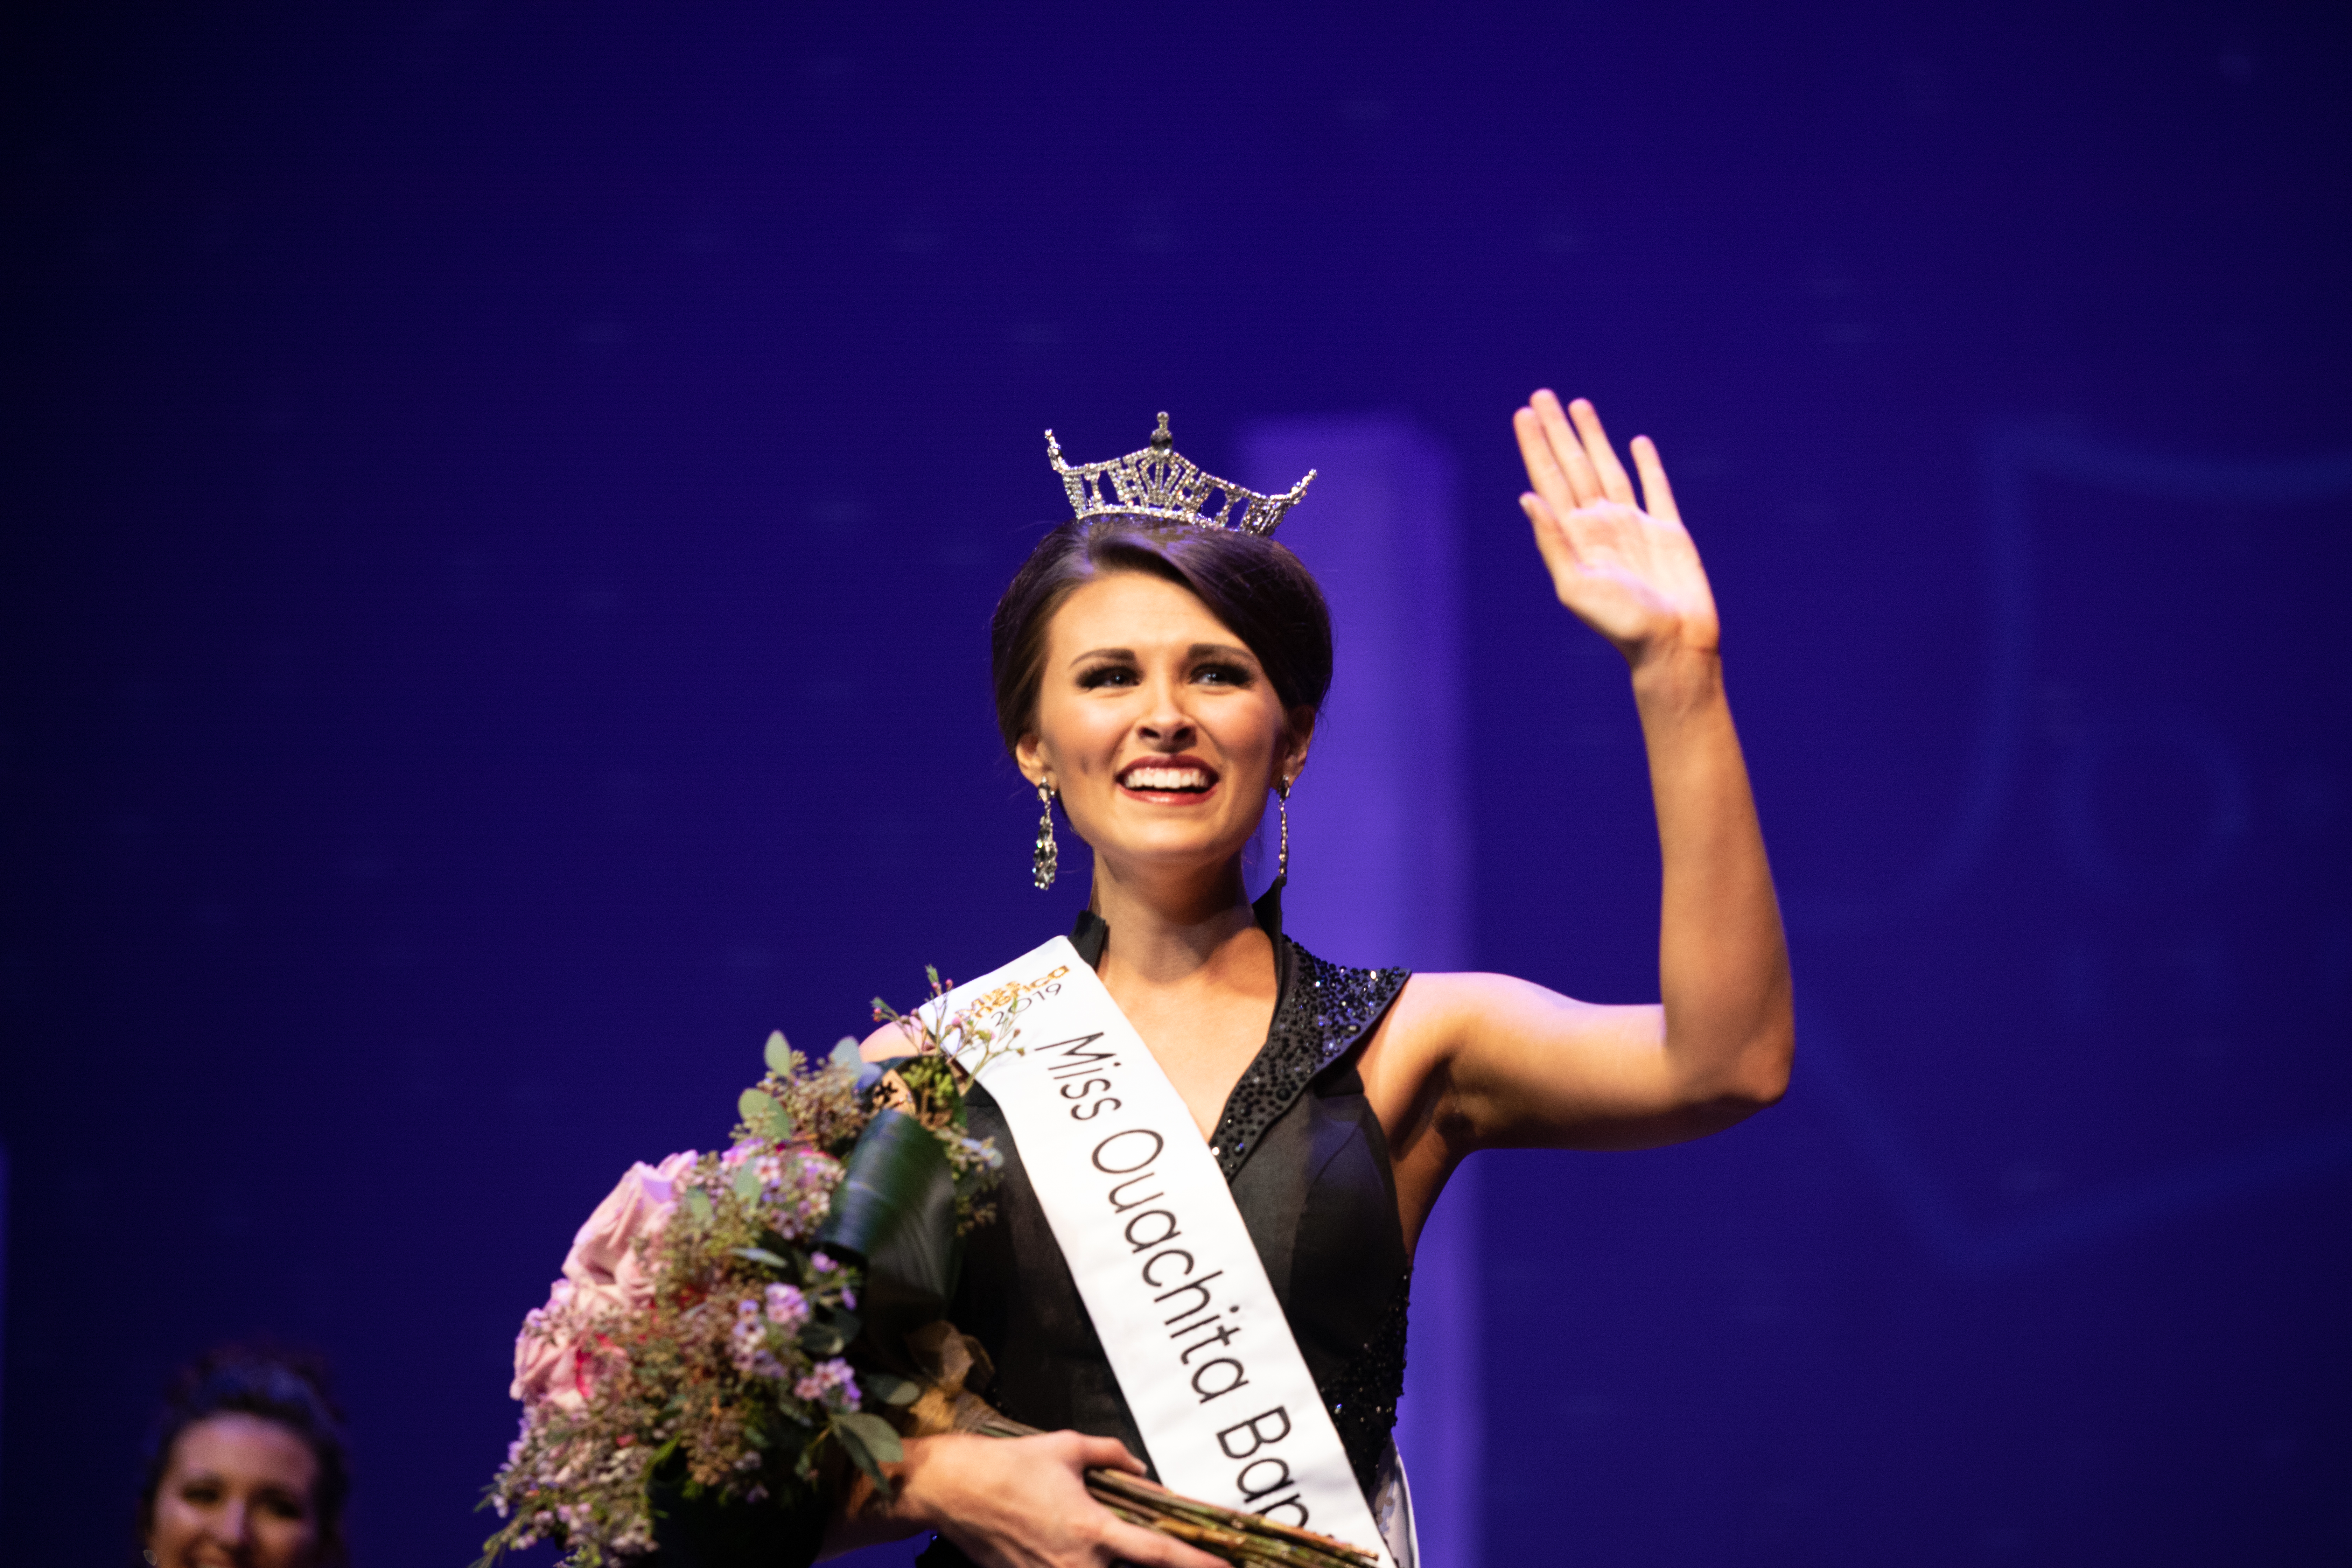 Miss OBU 2019, Julie Williams, celebrates her win in 2019 and waves to the crowd